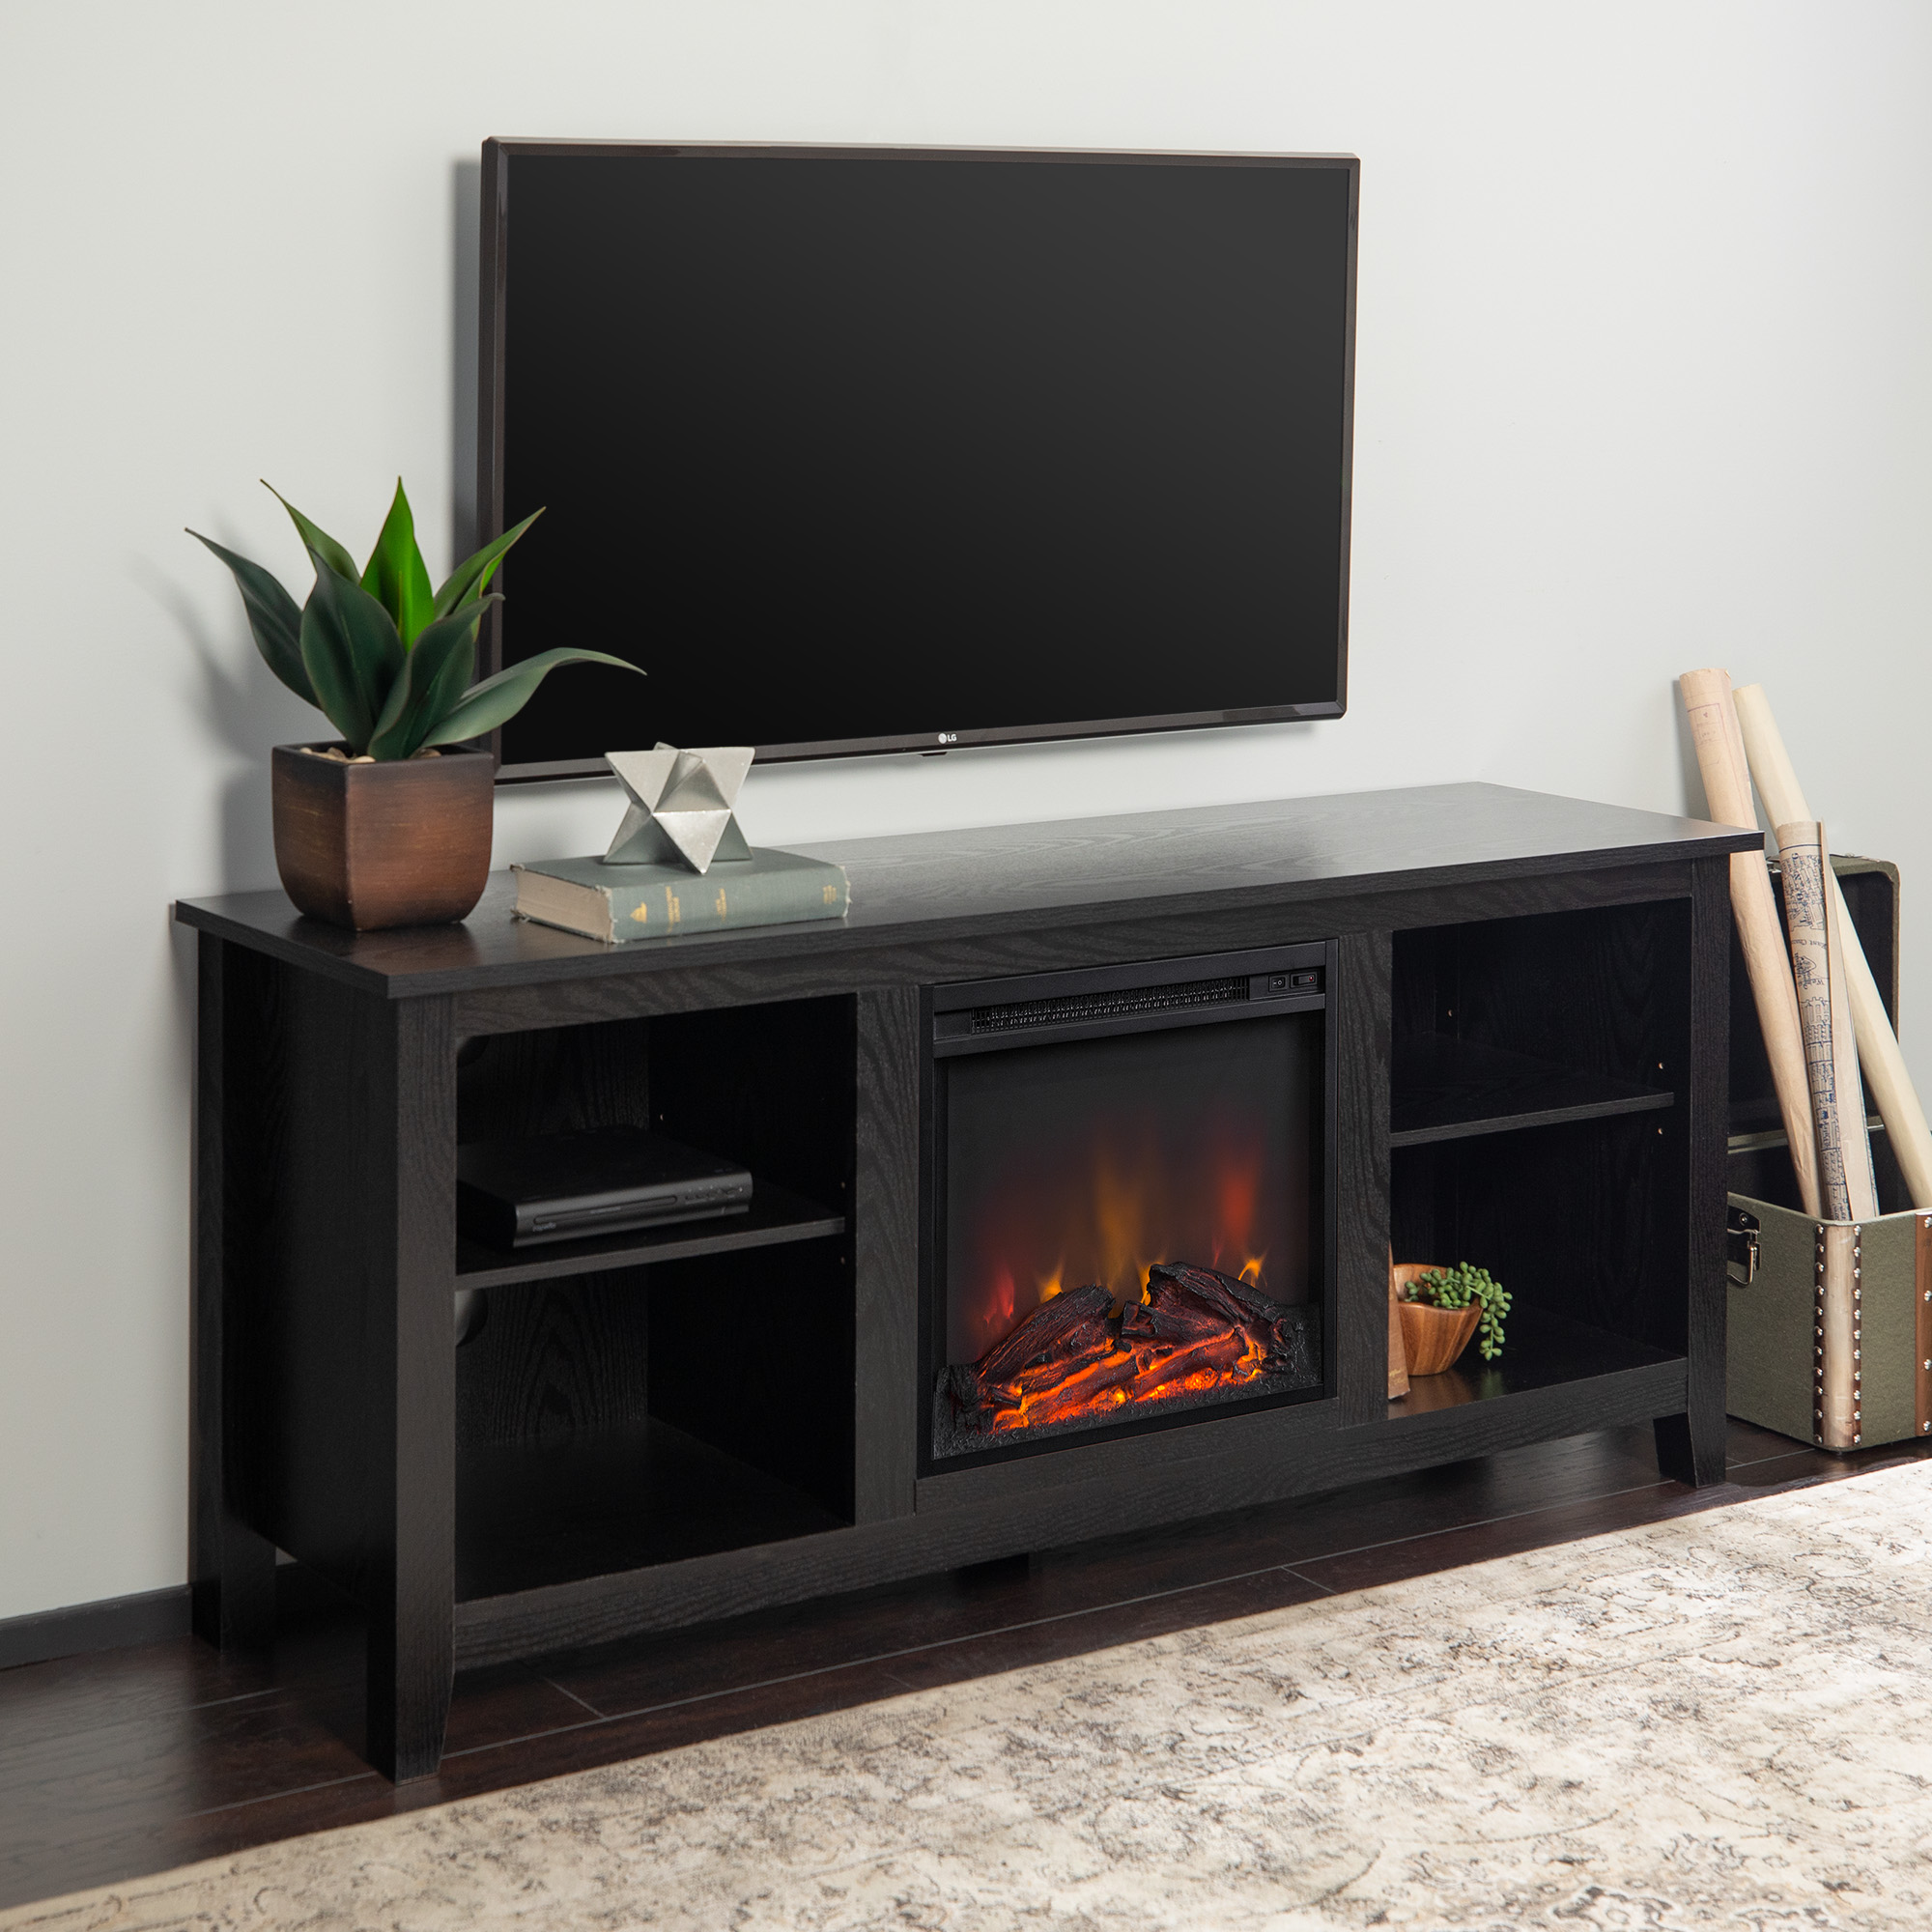 Walker Edison Traditional Fireplace TV Stand for TVs Up to 64" - Black - image 1 of 9